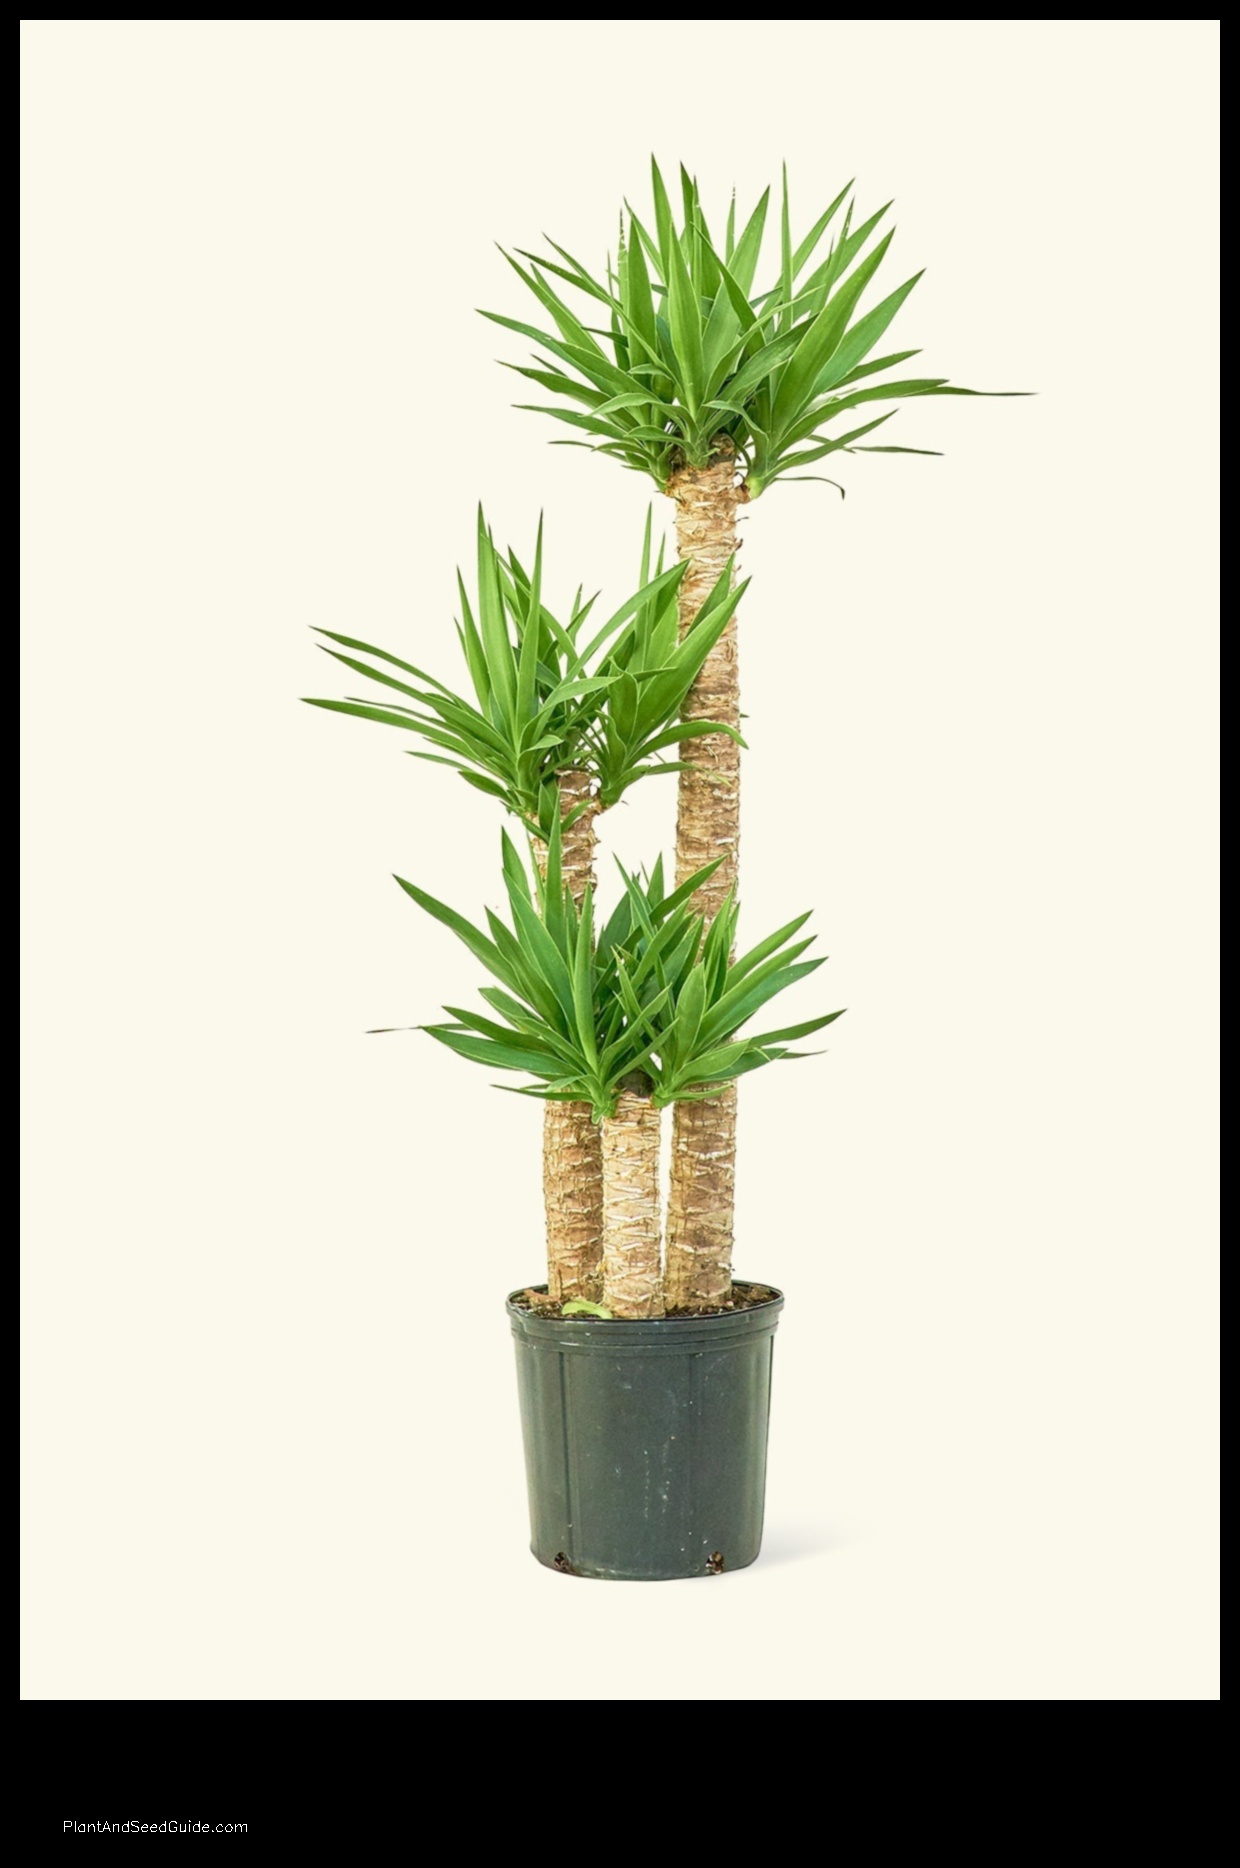 where can i buy a yucca plant